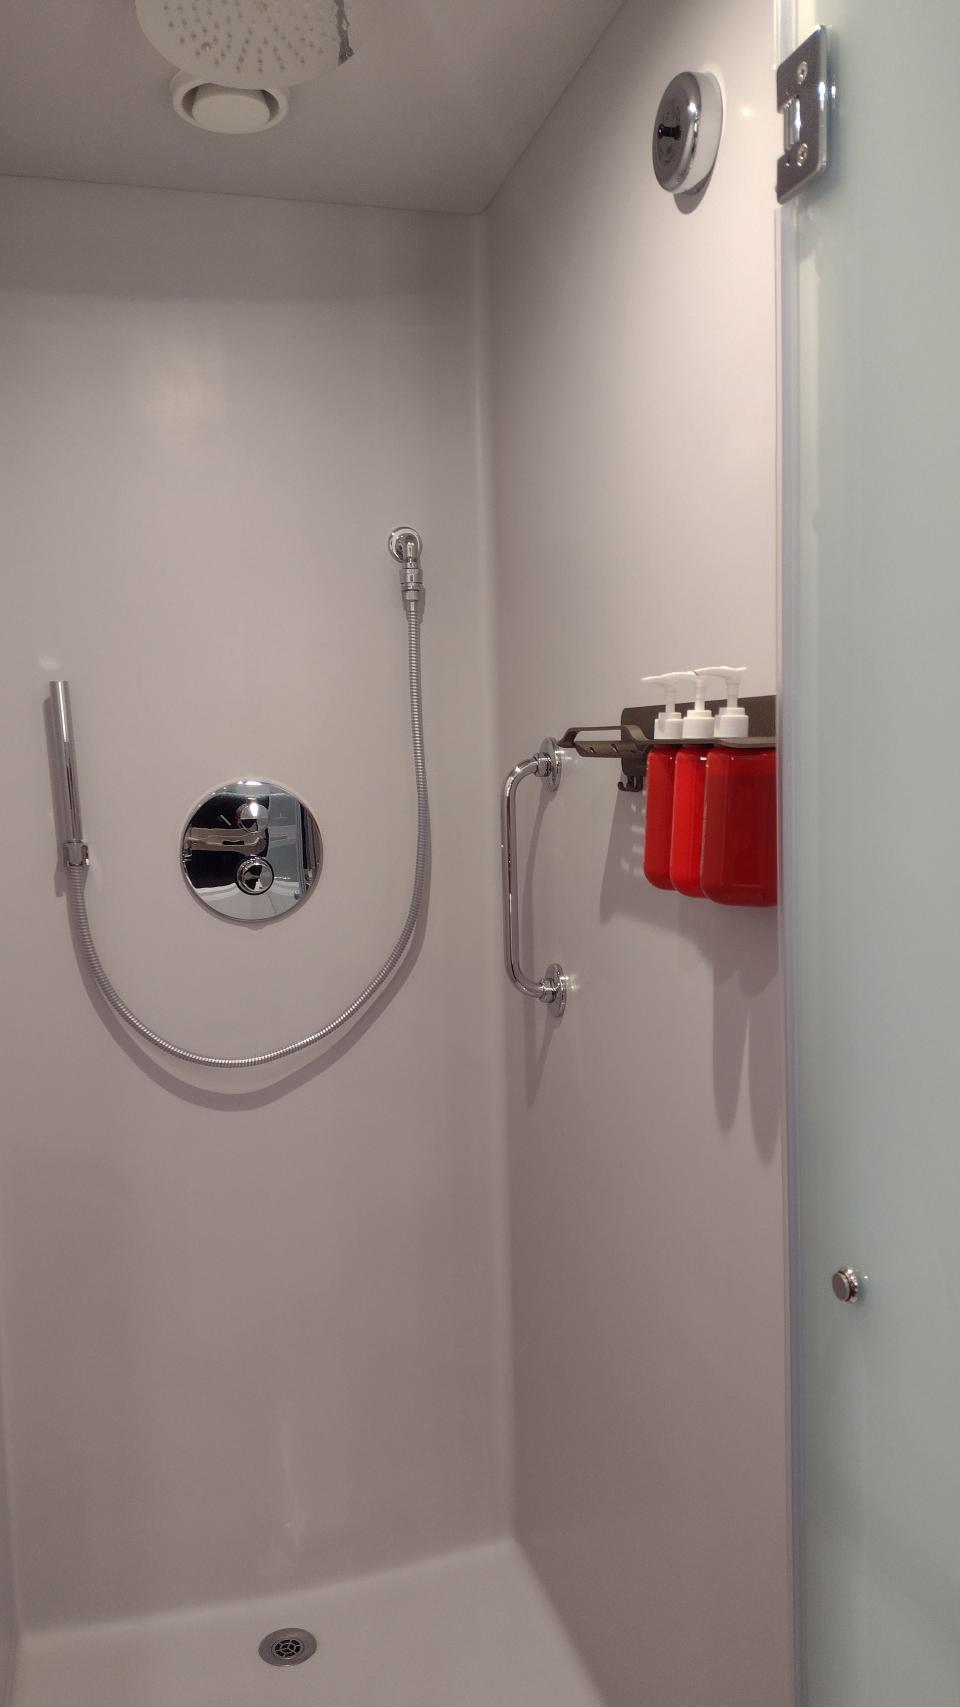 A small shower in a cruise cabin bathroom.